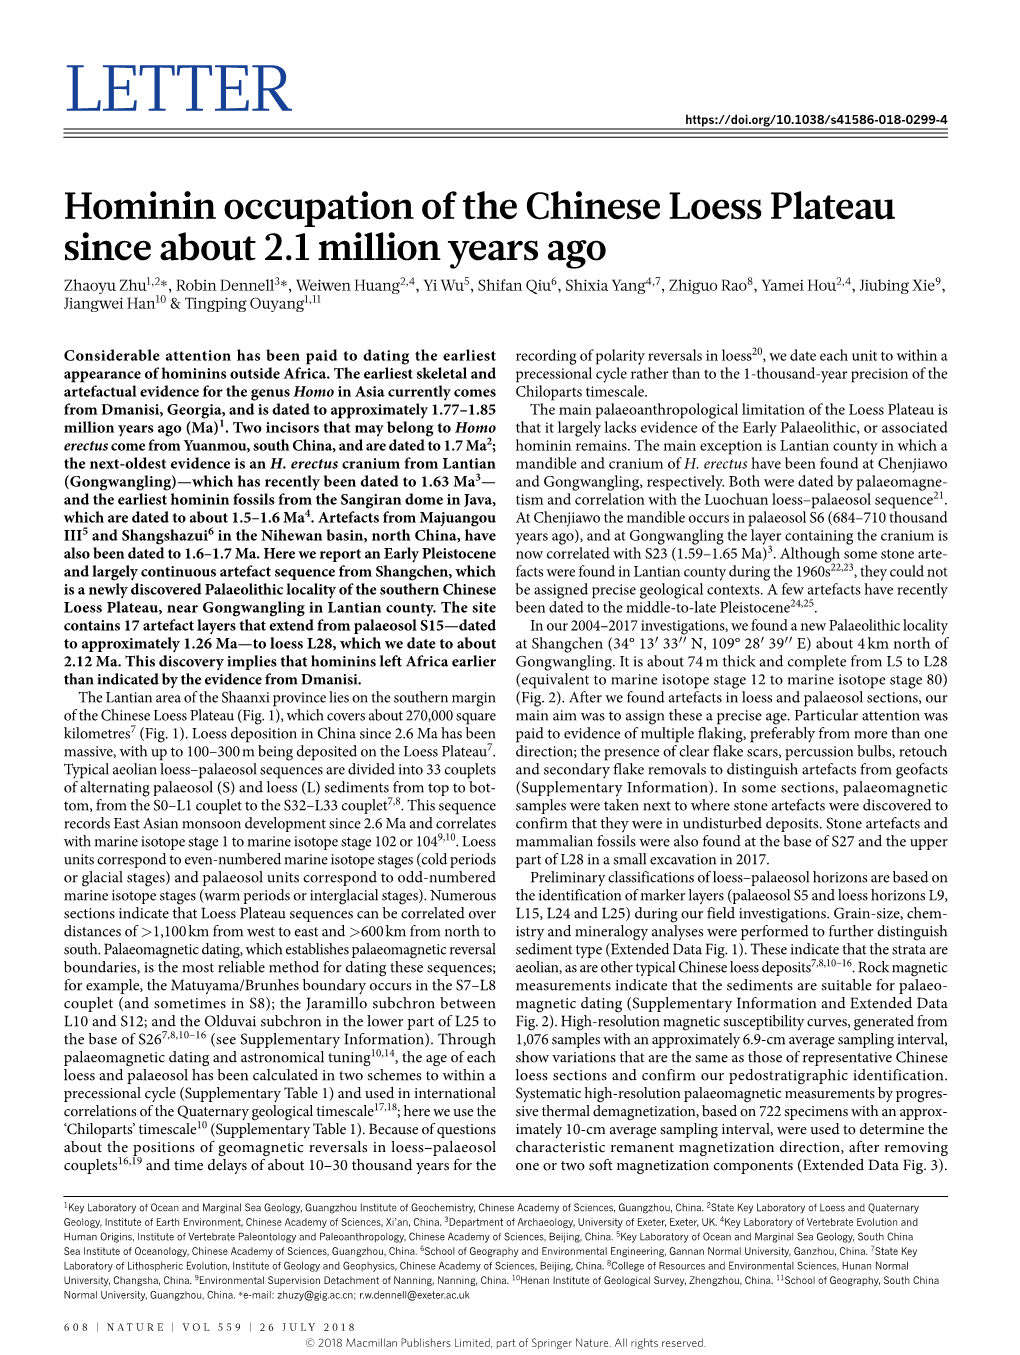 Hominin Occupation of the Chinese Loess Plateau Since About 2.1